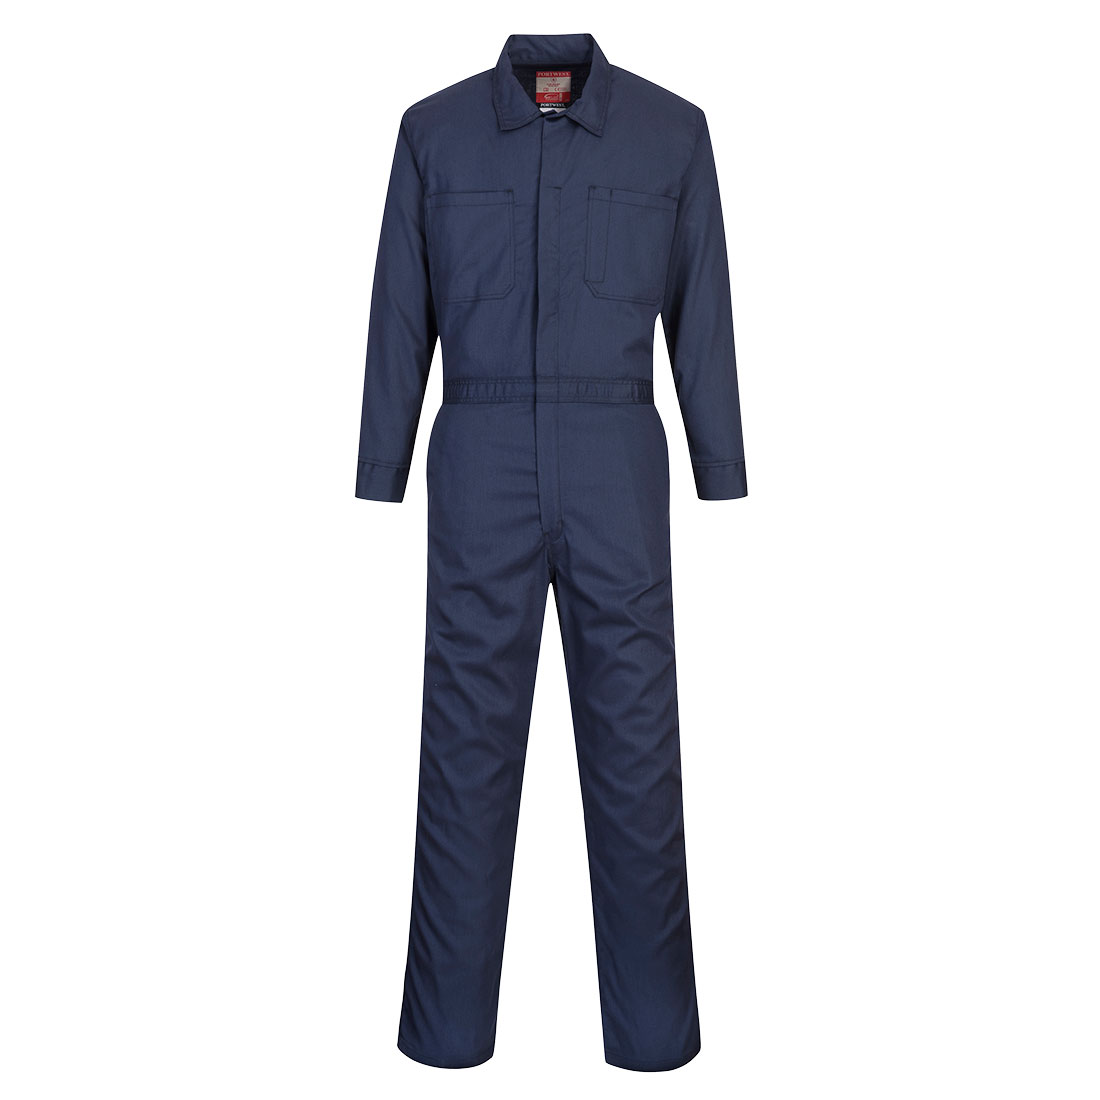 UFR87 Portwest® Bizflame® 88/12 FR/AR Classic Coverall - Navy